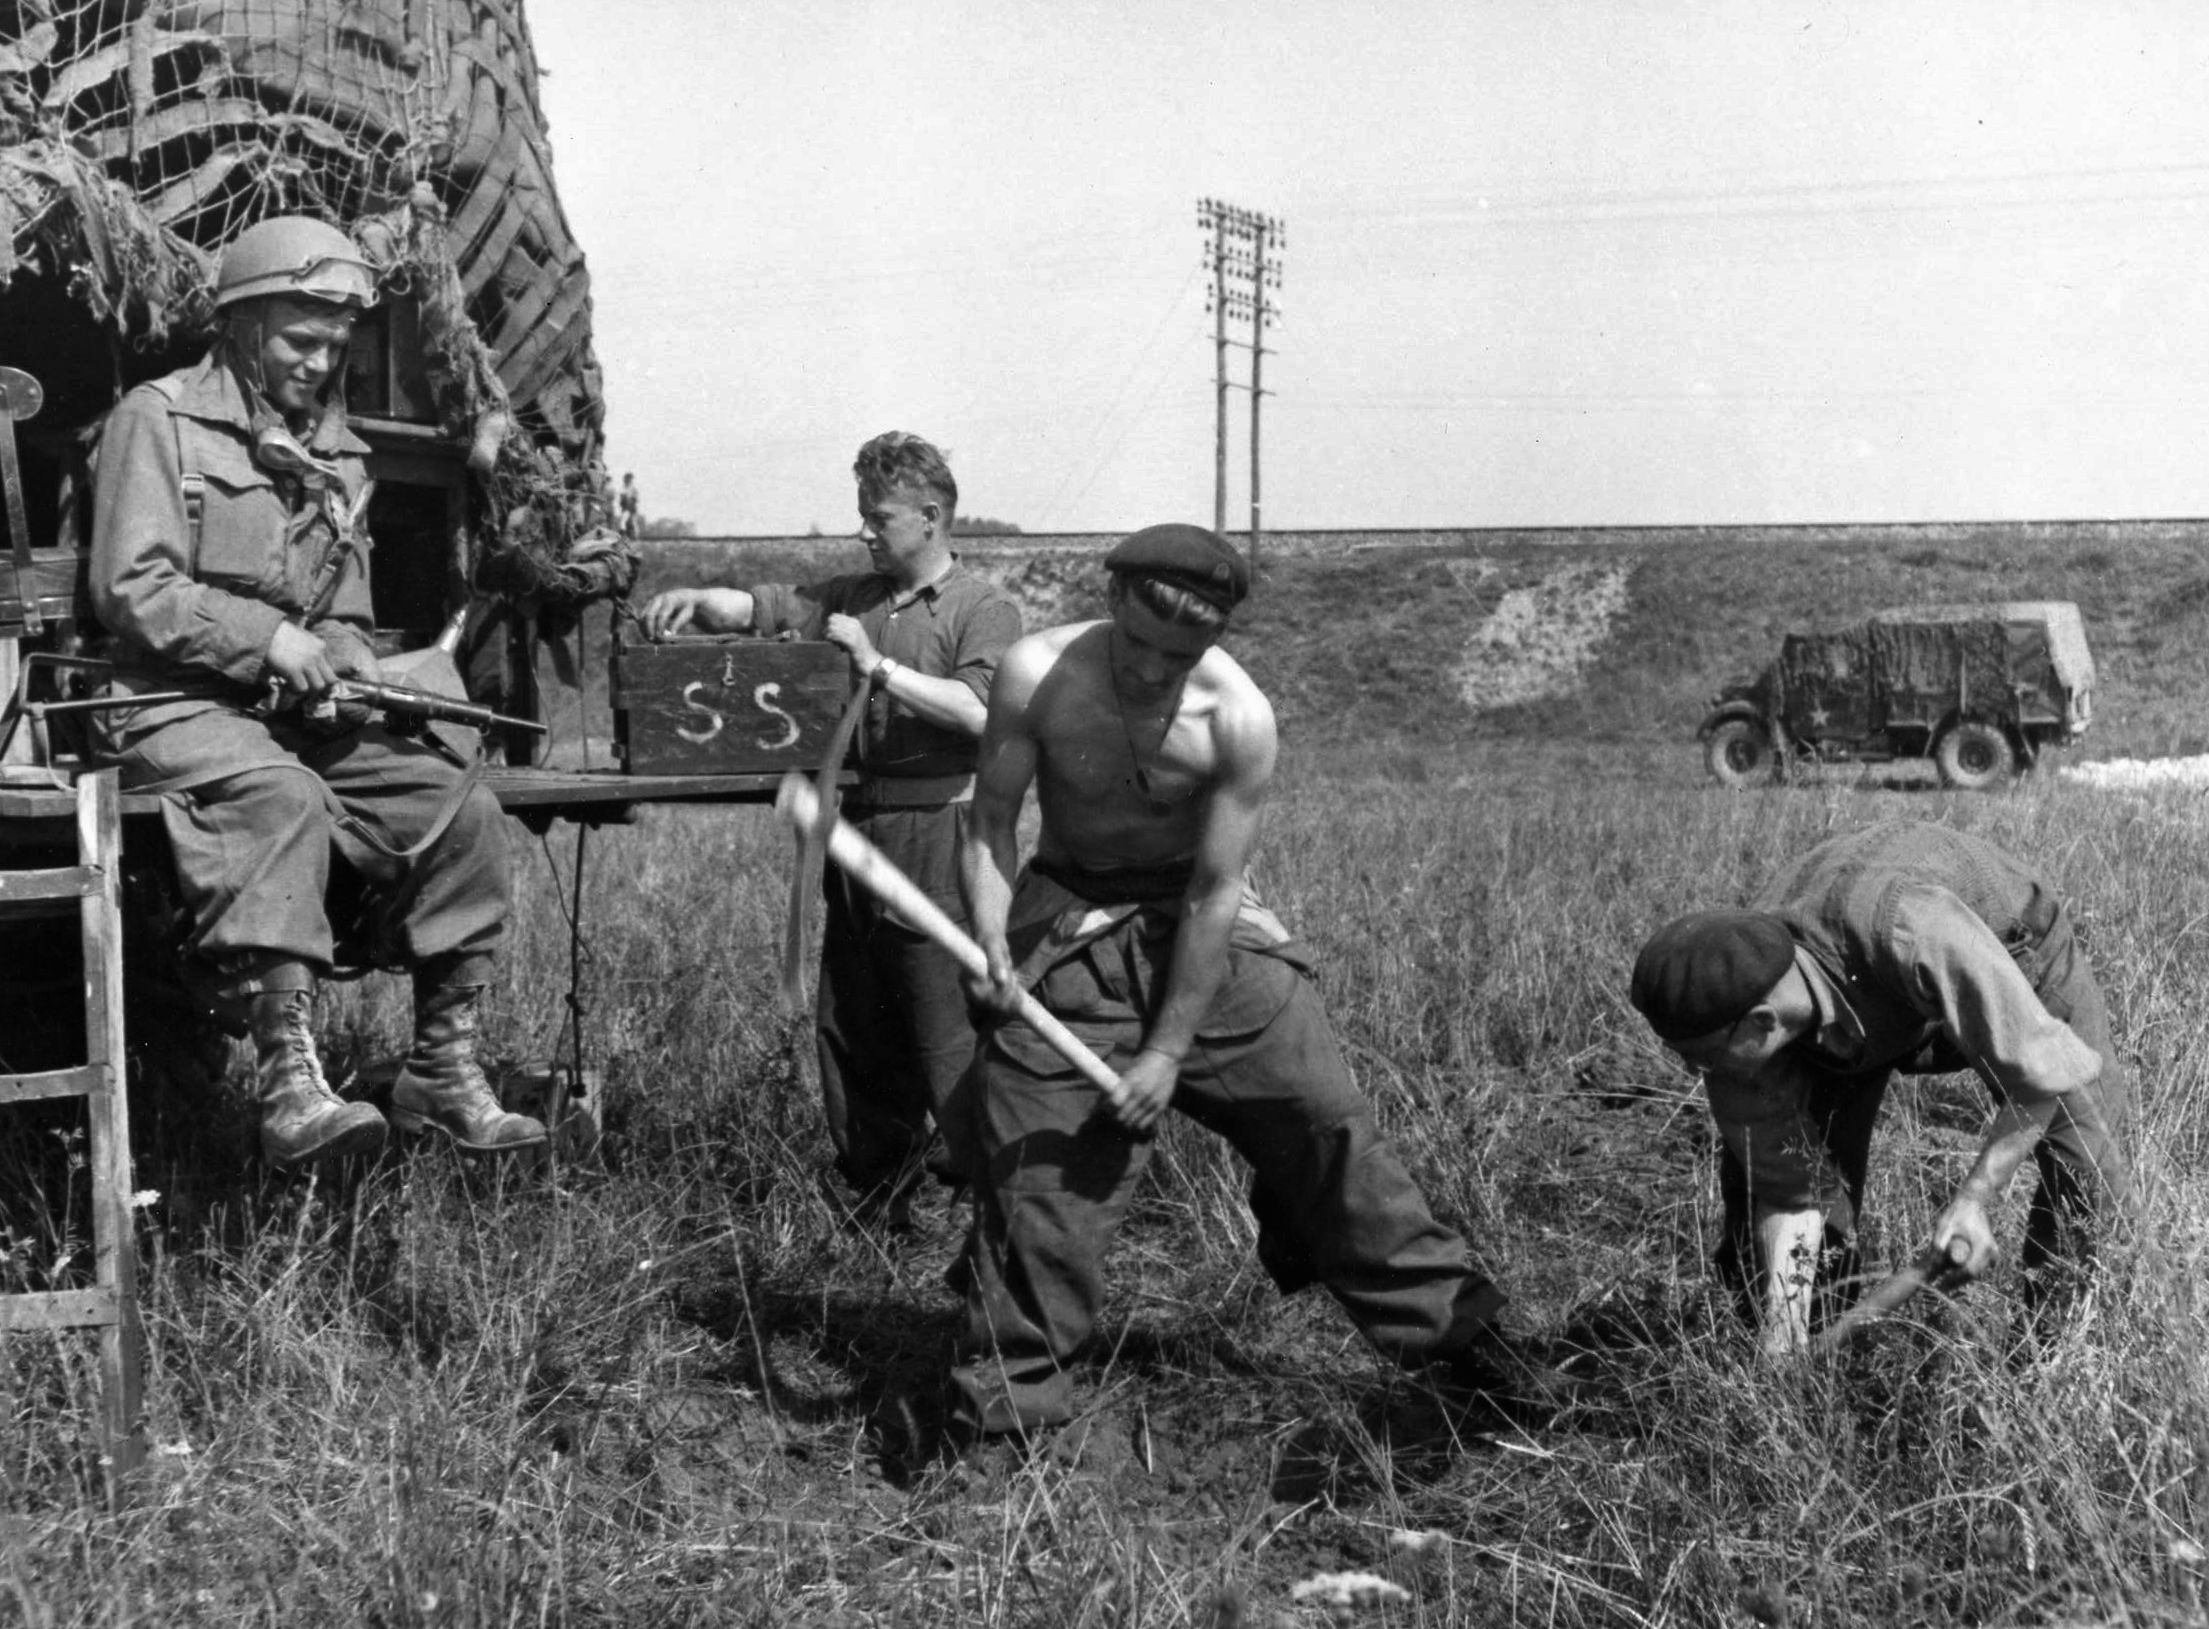 Digging in to hold their position somewhere in Normandy, some of these Polish soldiers have stripped to the waist in the summer heat. The Poles fought tenaciously during the closing of the Falaise Gap. (All photos: National Archives)